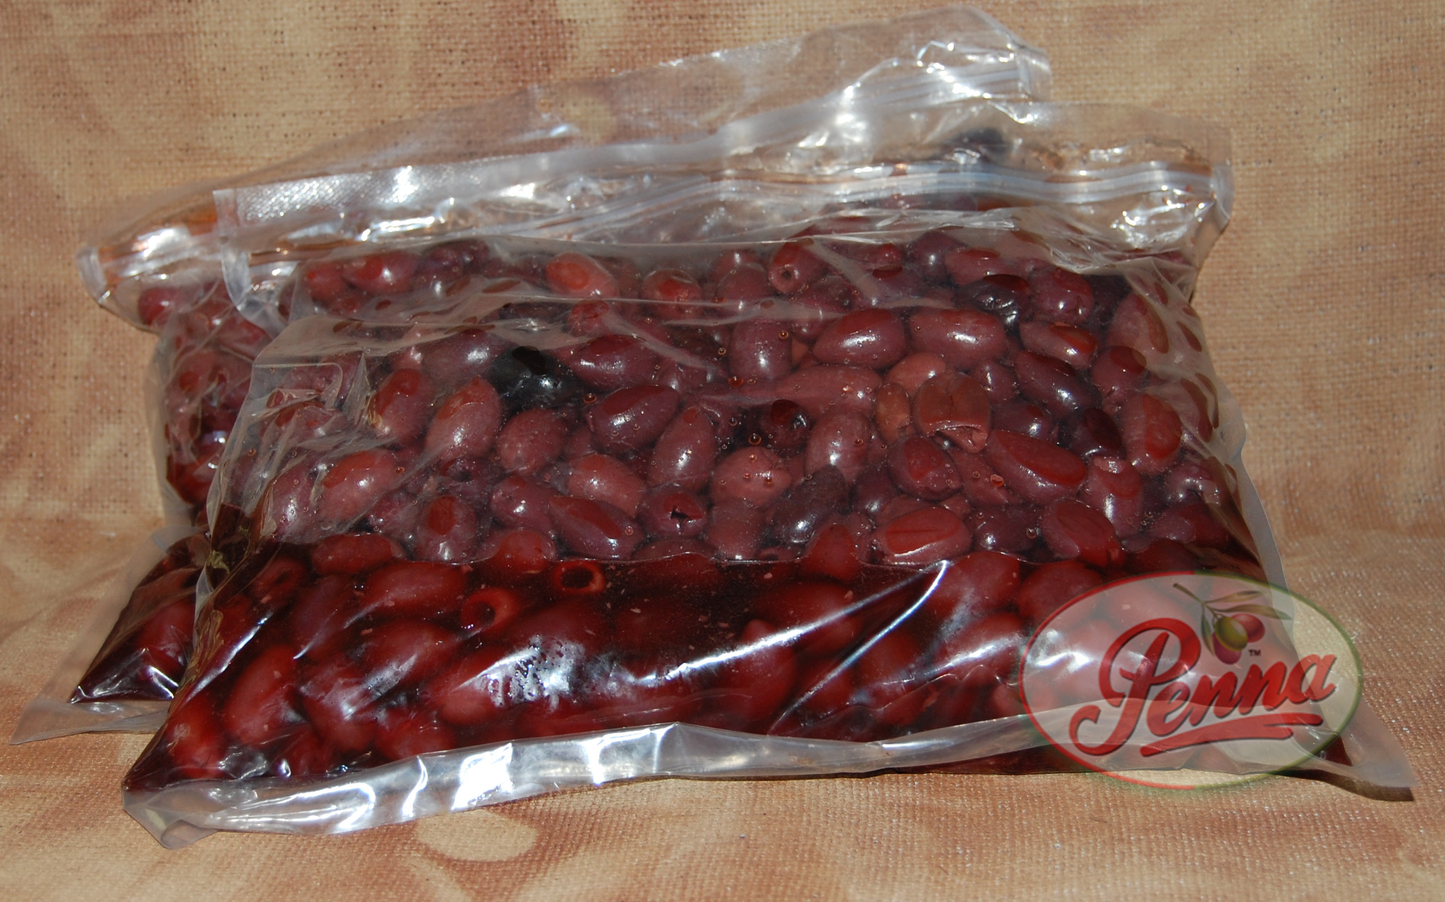 Kalamata Pitted Olives (two 4lb bags)